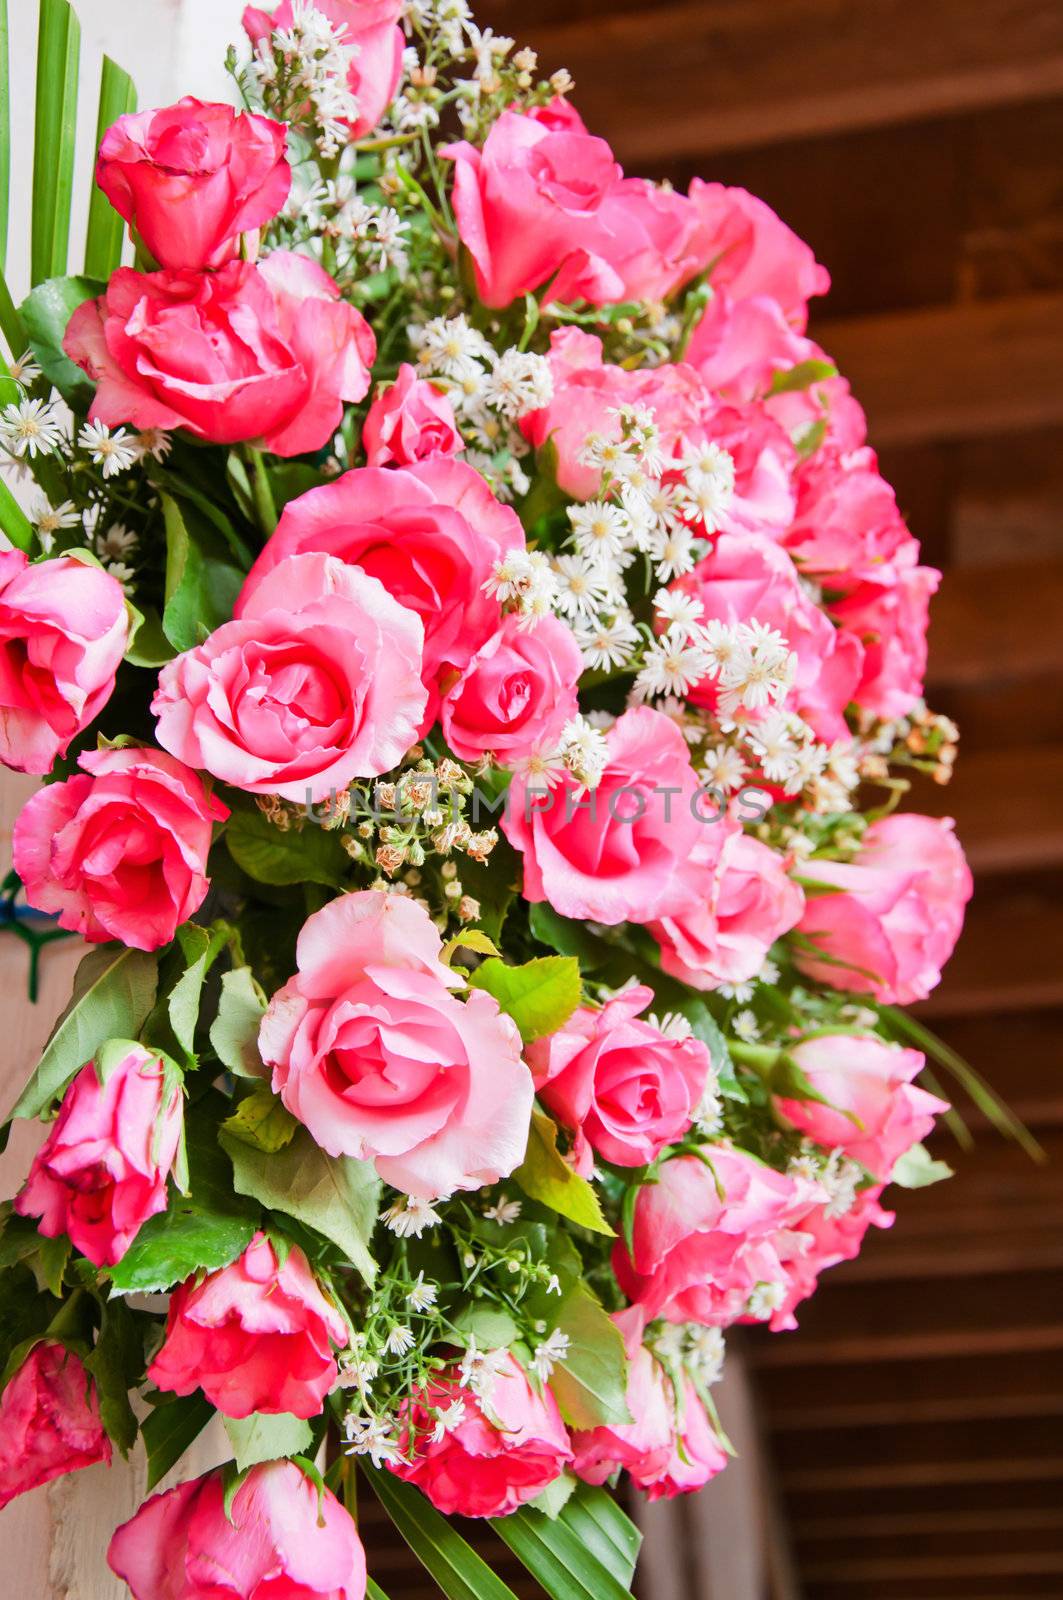 Bouquet of beautiful pink rose flowers